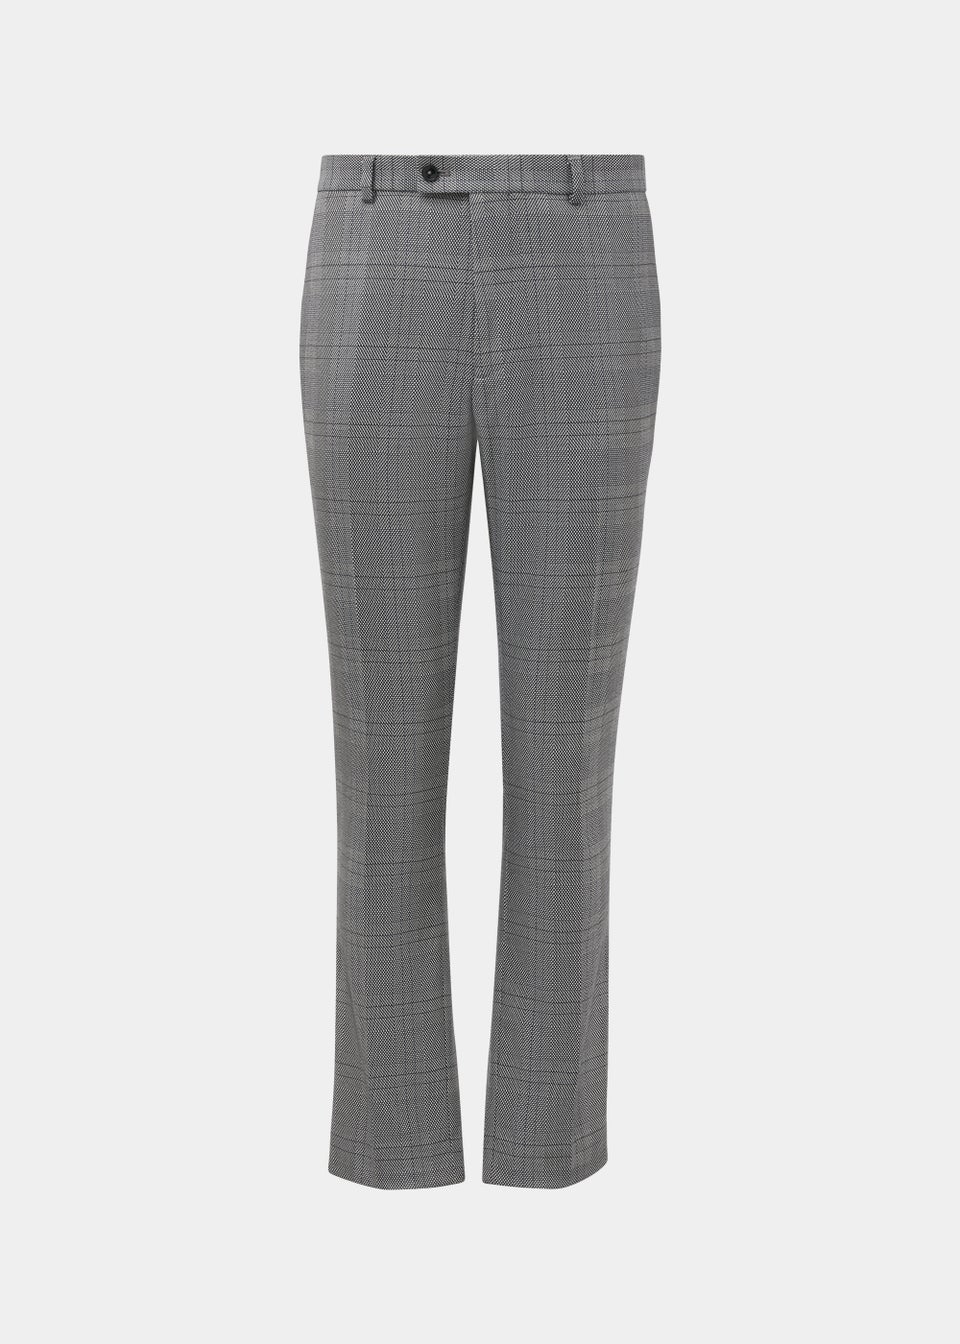 Taylor & Wright Forth Grey Check Skinny Fit Suit Trousers